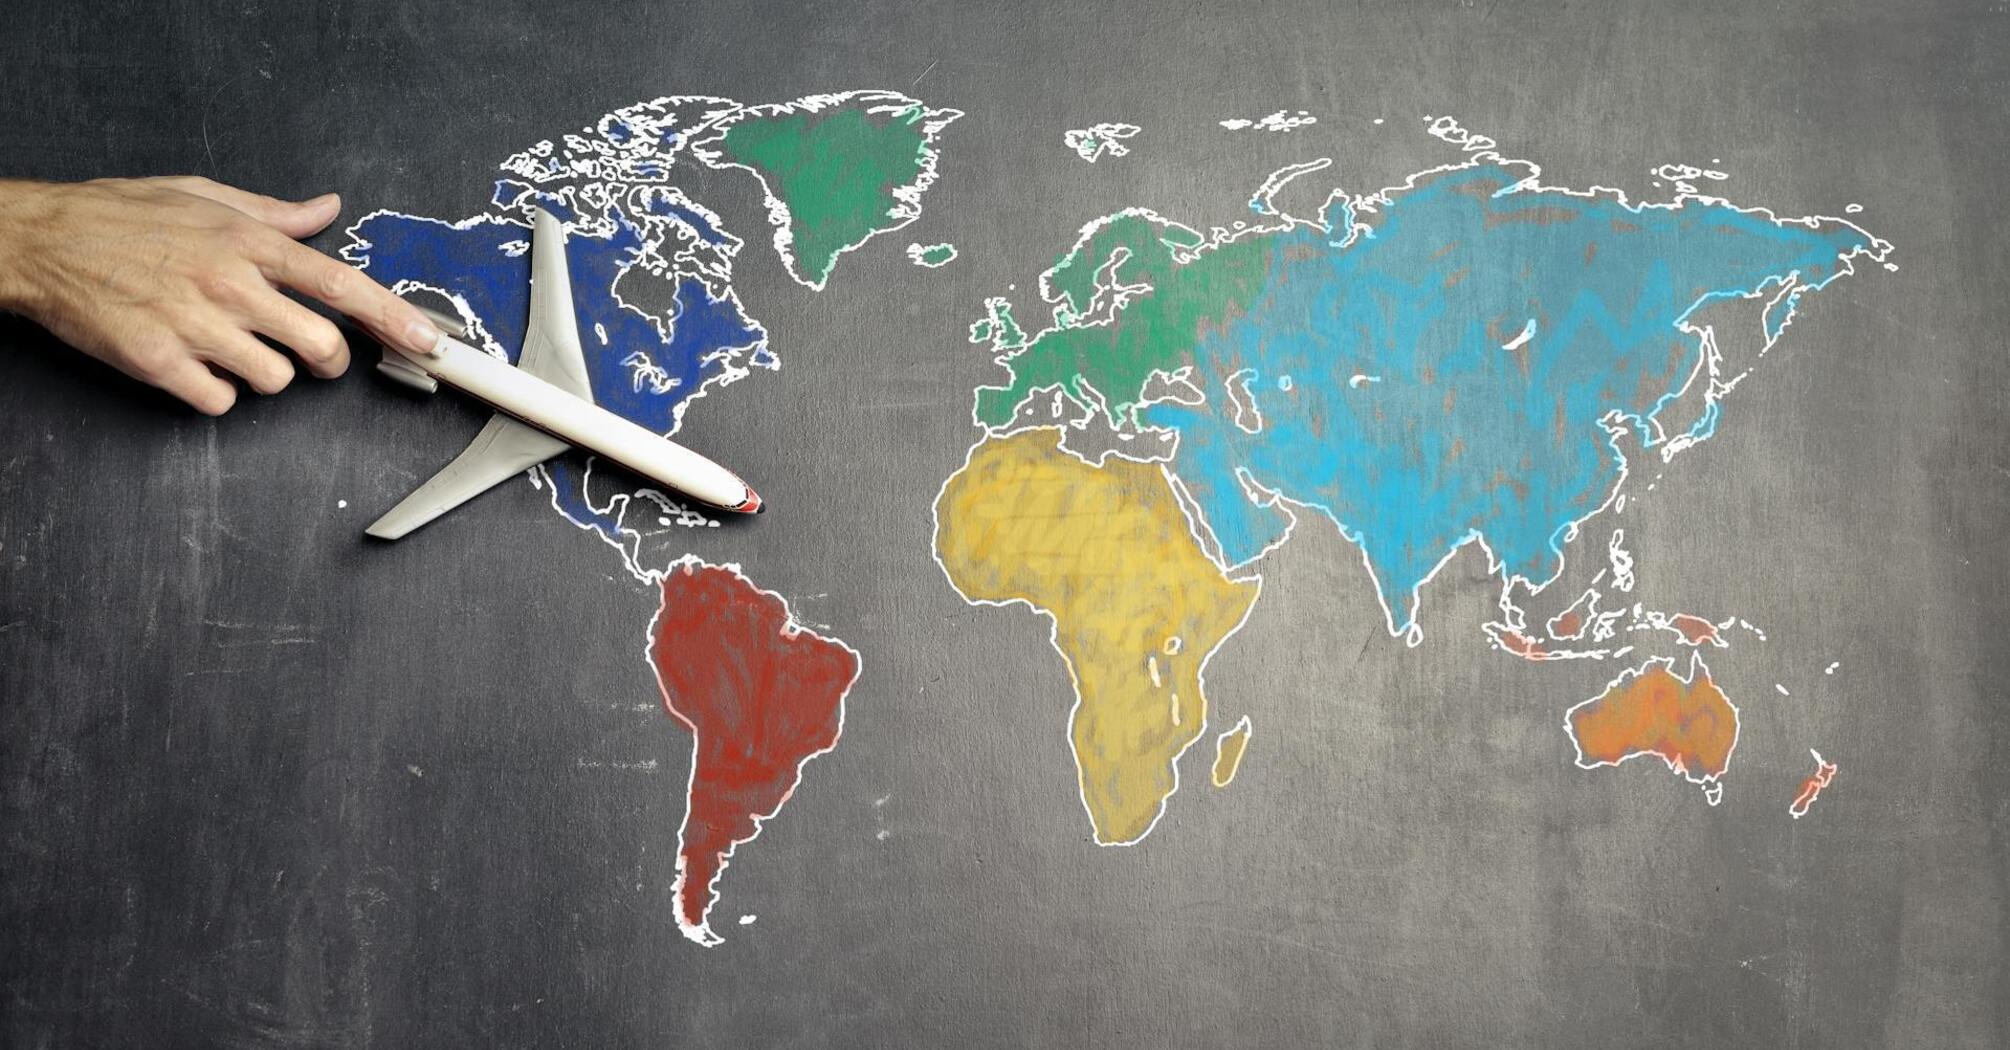 A hand positioning a model airplane on a chalk-drawn world map on a blackboard, symbolizing global travel